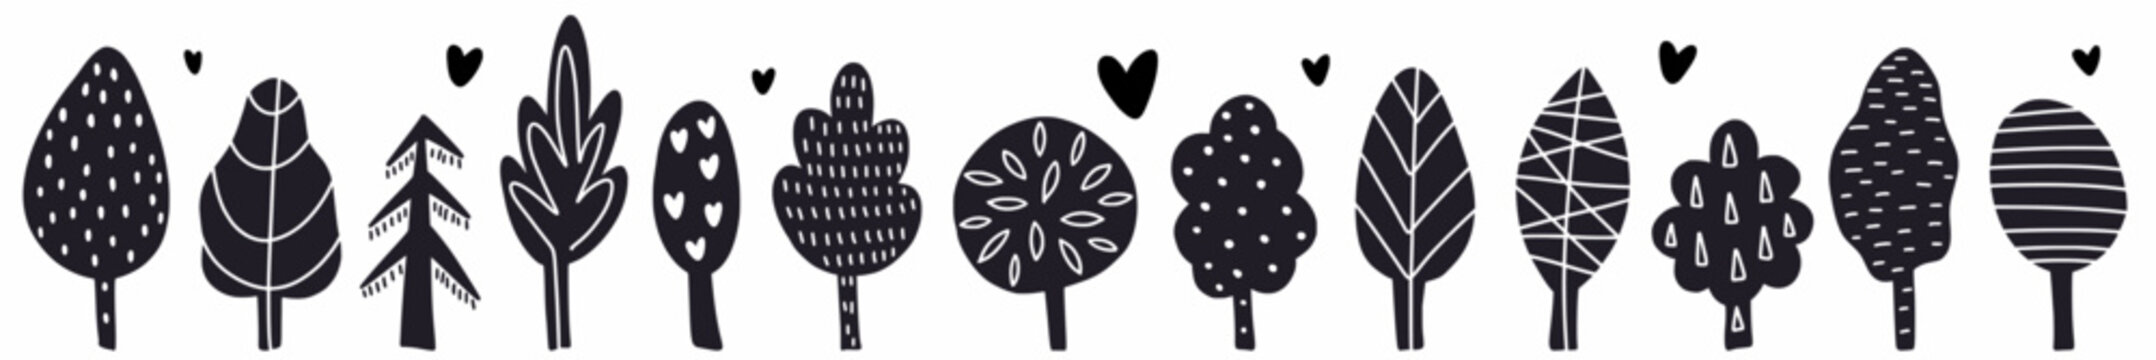 Vector, children's, horizontal pattern with hand-drawn trees in doodle style